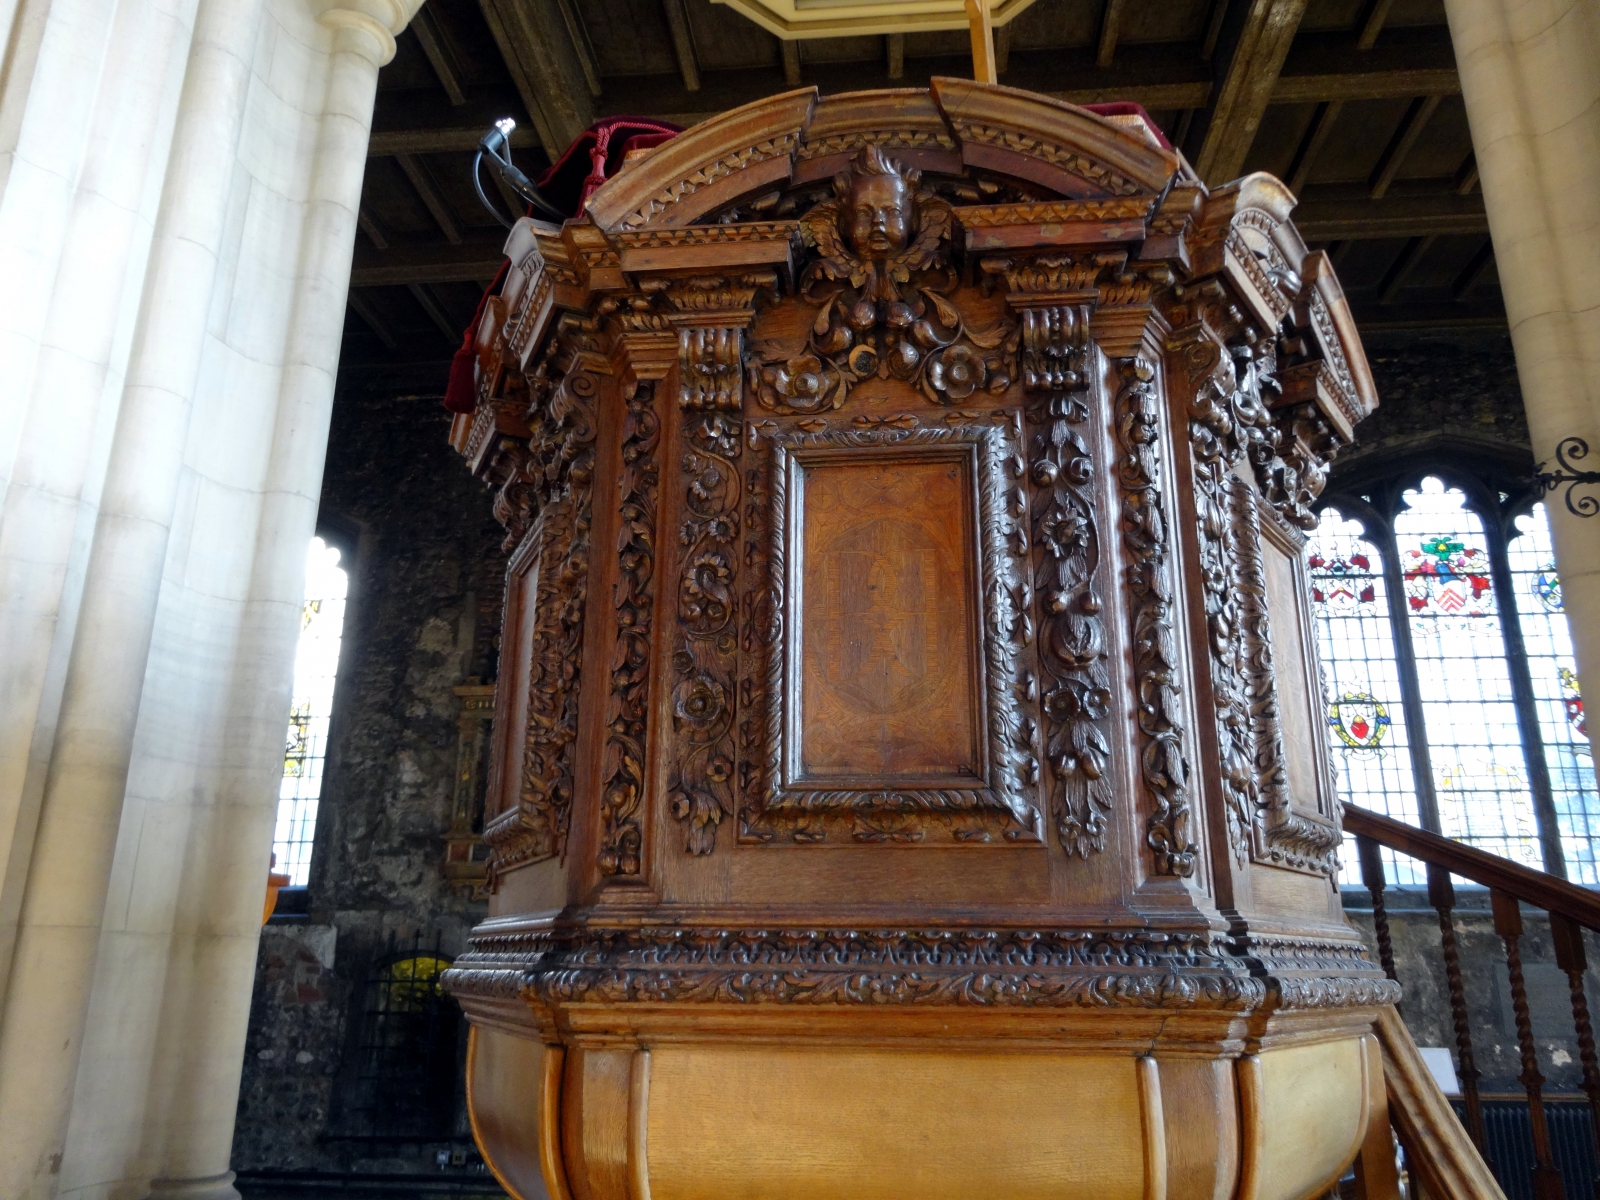 photo of the pulpit - "in the style of Gibbons"